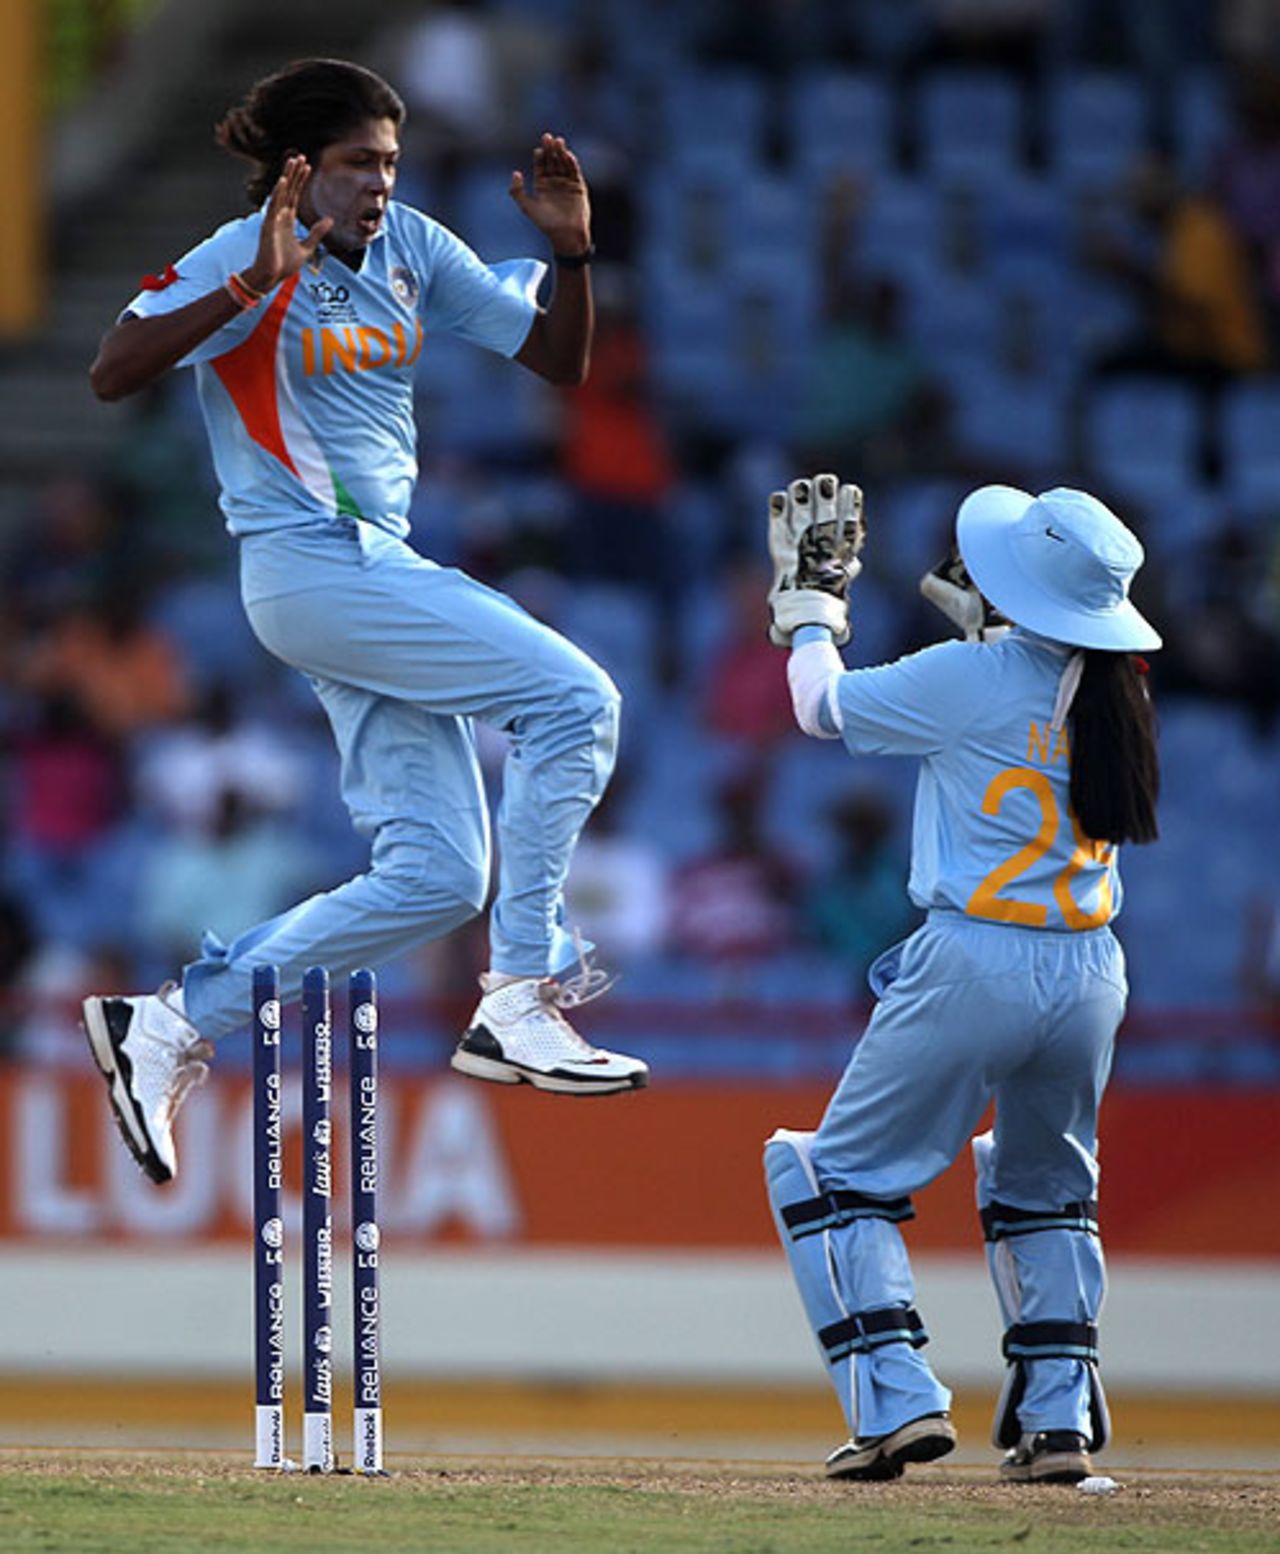 Jhulan Goswami dismissed Elyse Villani in the first over to give India hope,  Australia Women v India Women, ICC Women's World Twenty20, 1st Semi-Final, St Lucia, May 13, 2010